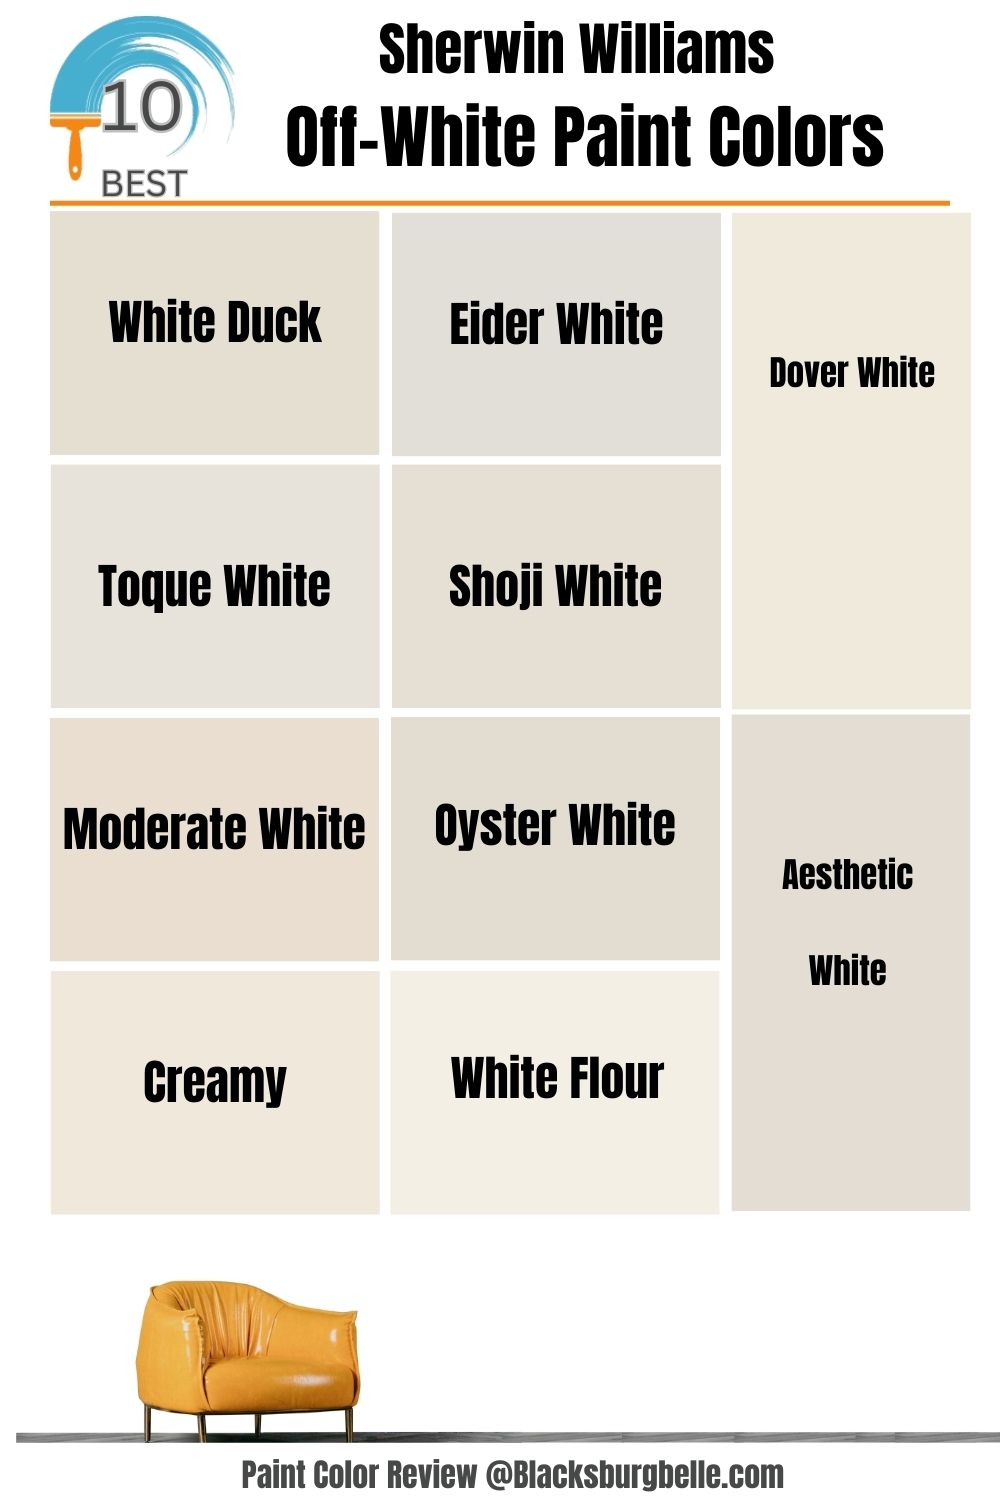 Sherwin Williams Off-White Paint Colors 